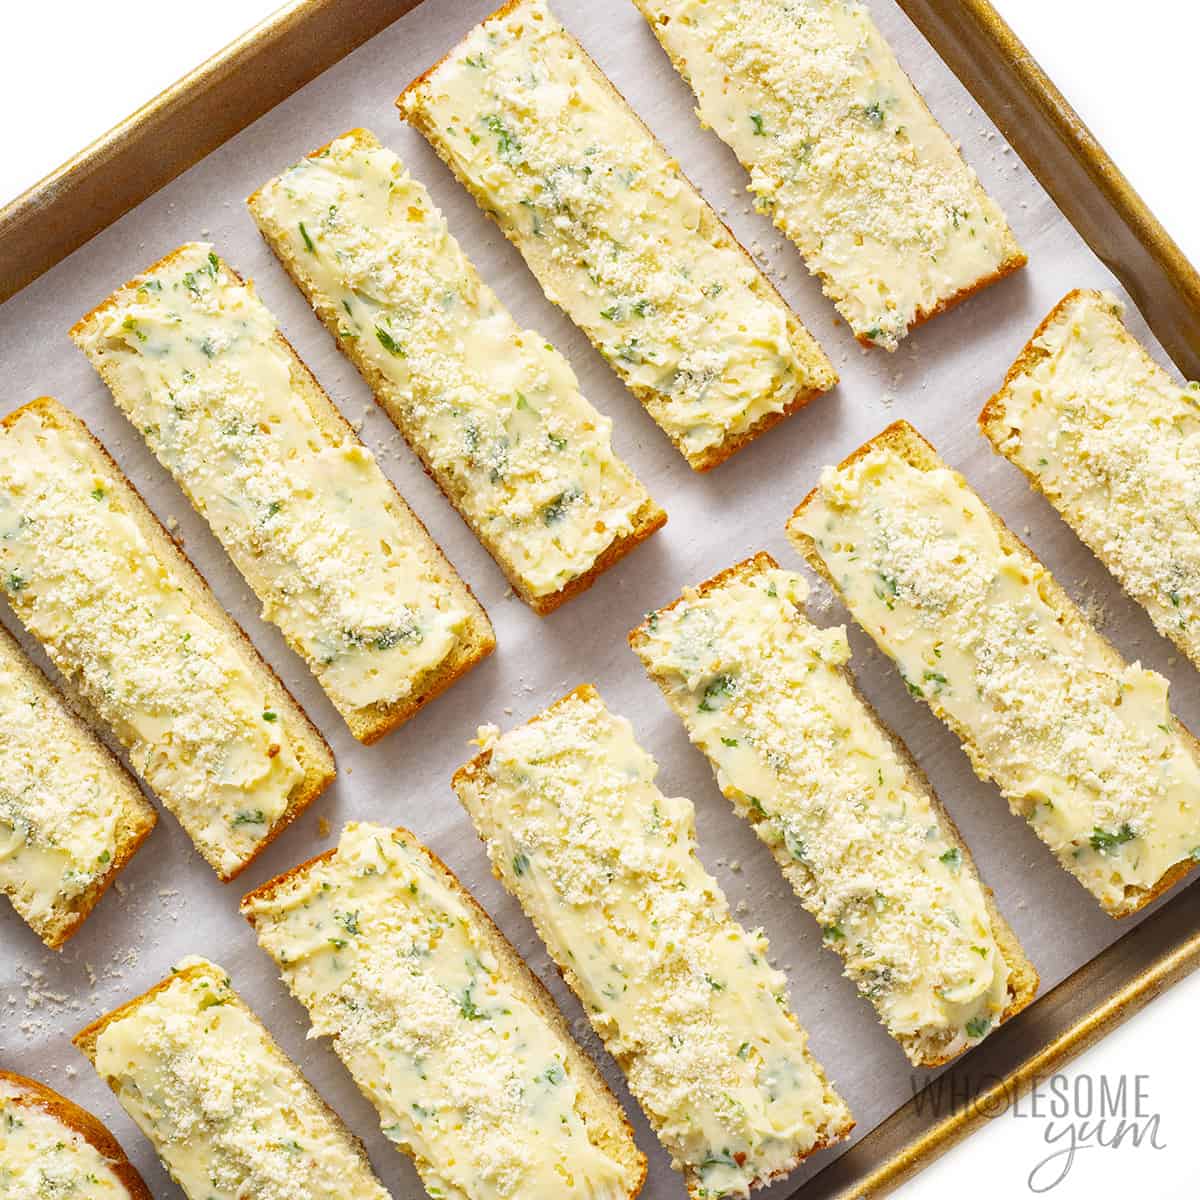 Buttered bread slices on baking pan.